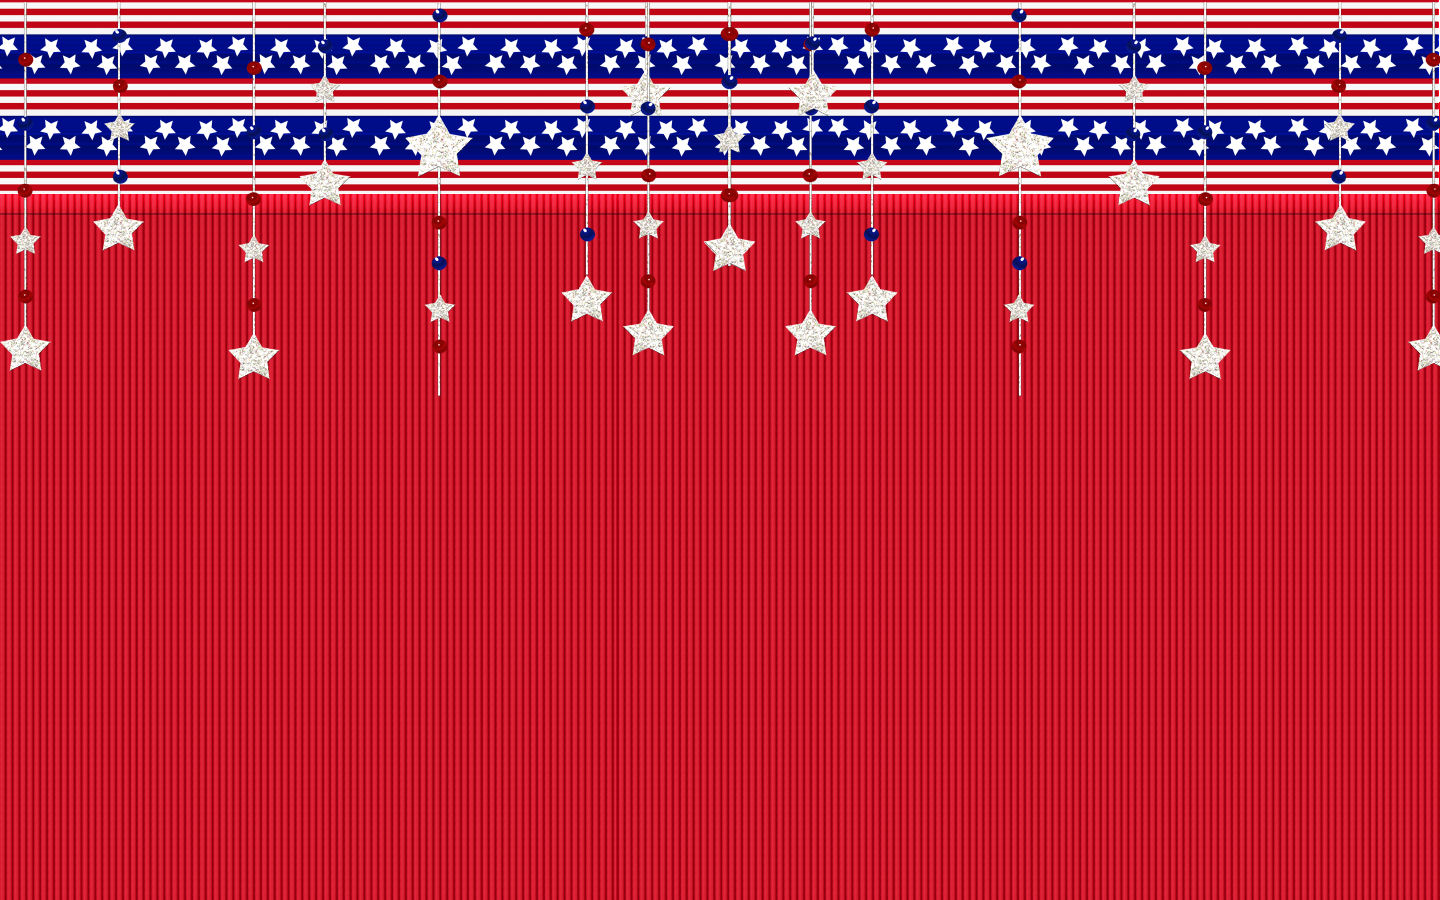 Stars And Stripes Twitter Backgrounds, Stars And Stripes Twitter ...